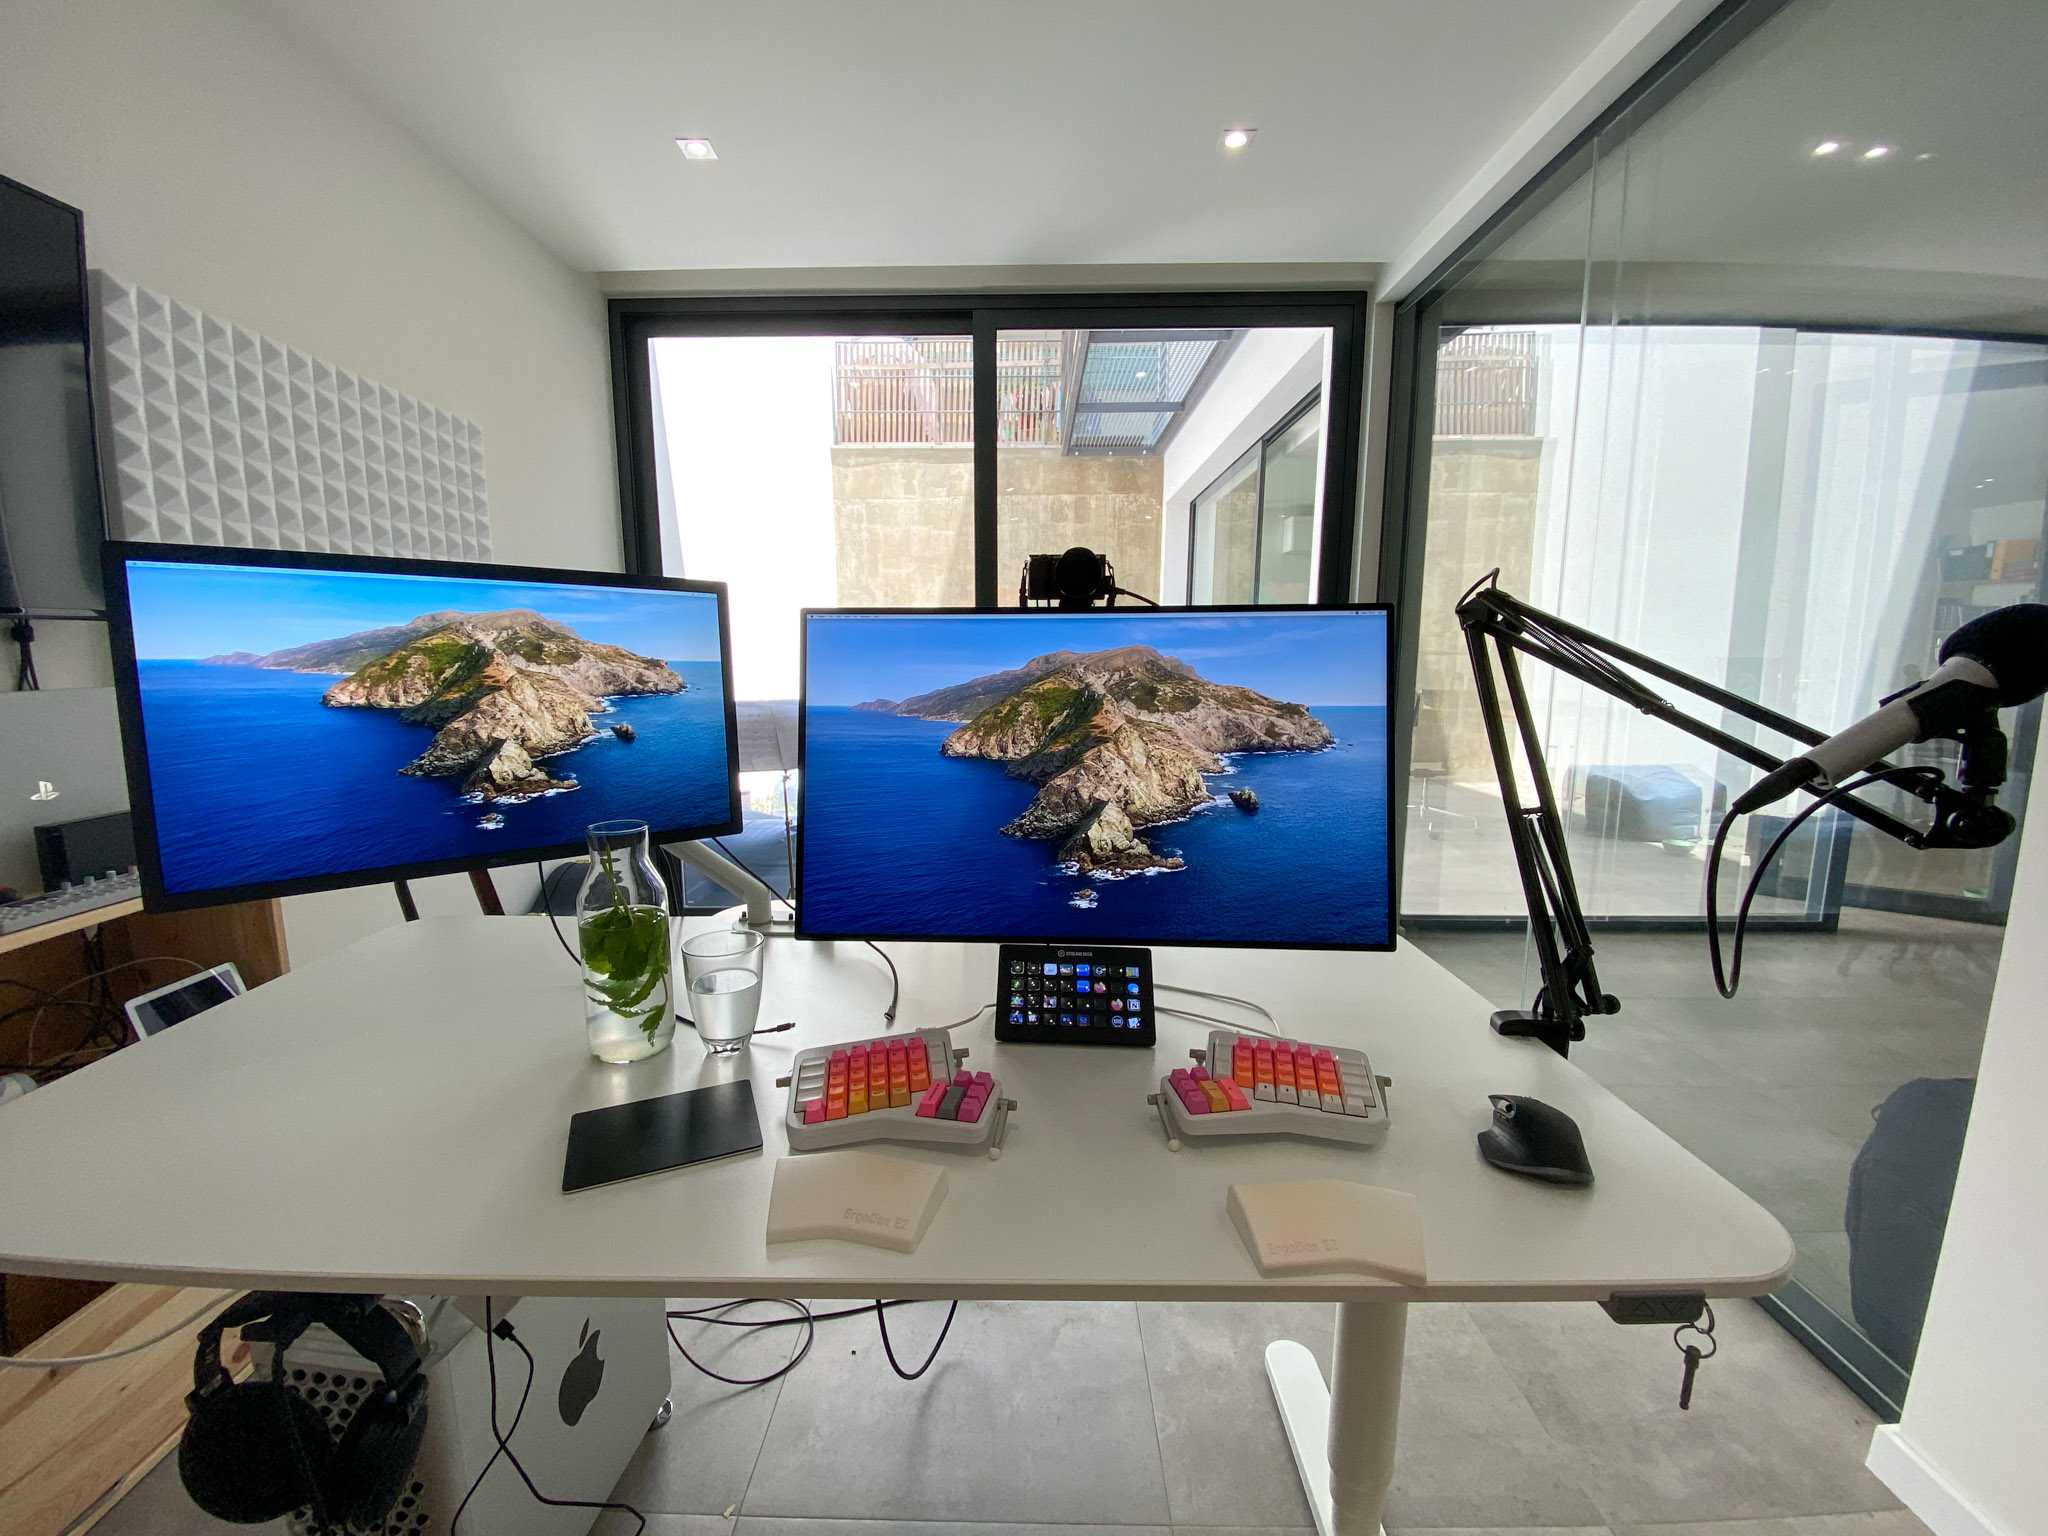 desk with keyboard, mouse, two monitors and microphone